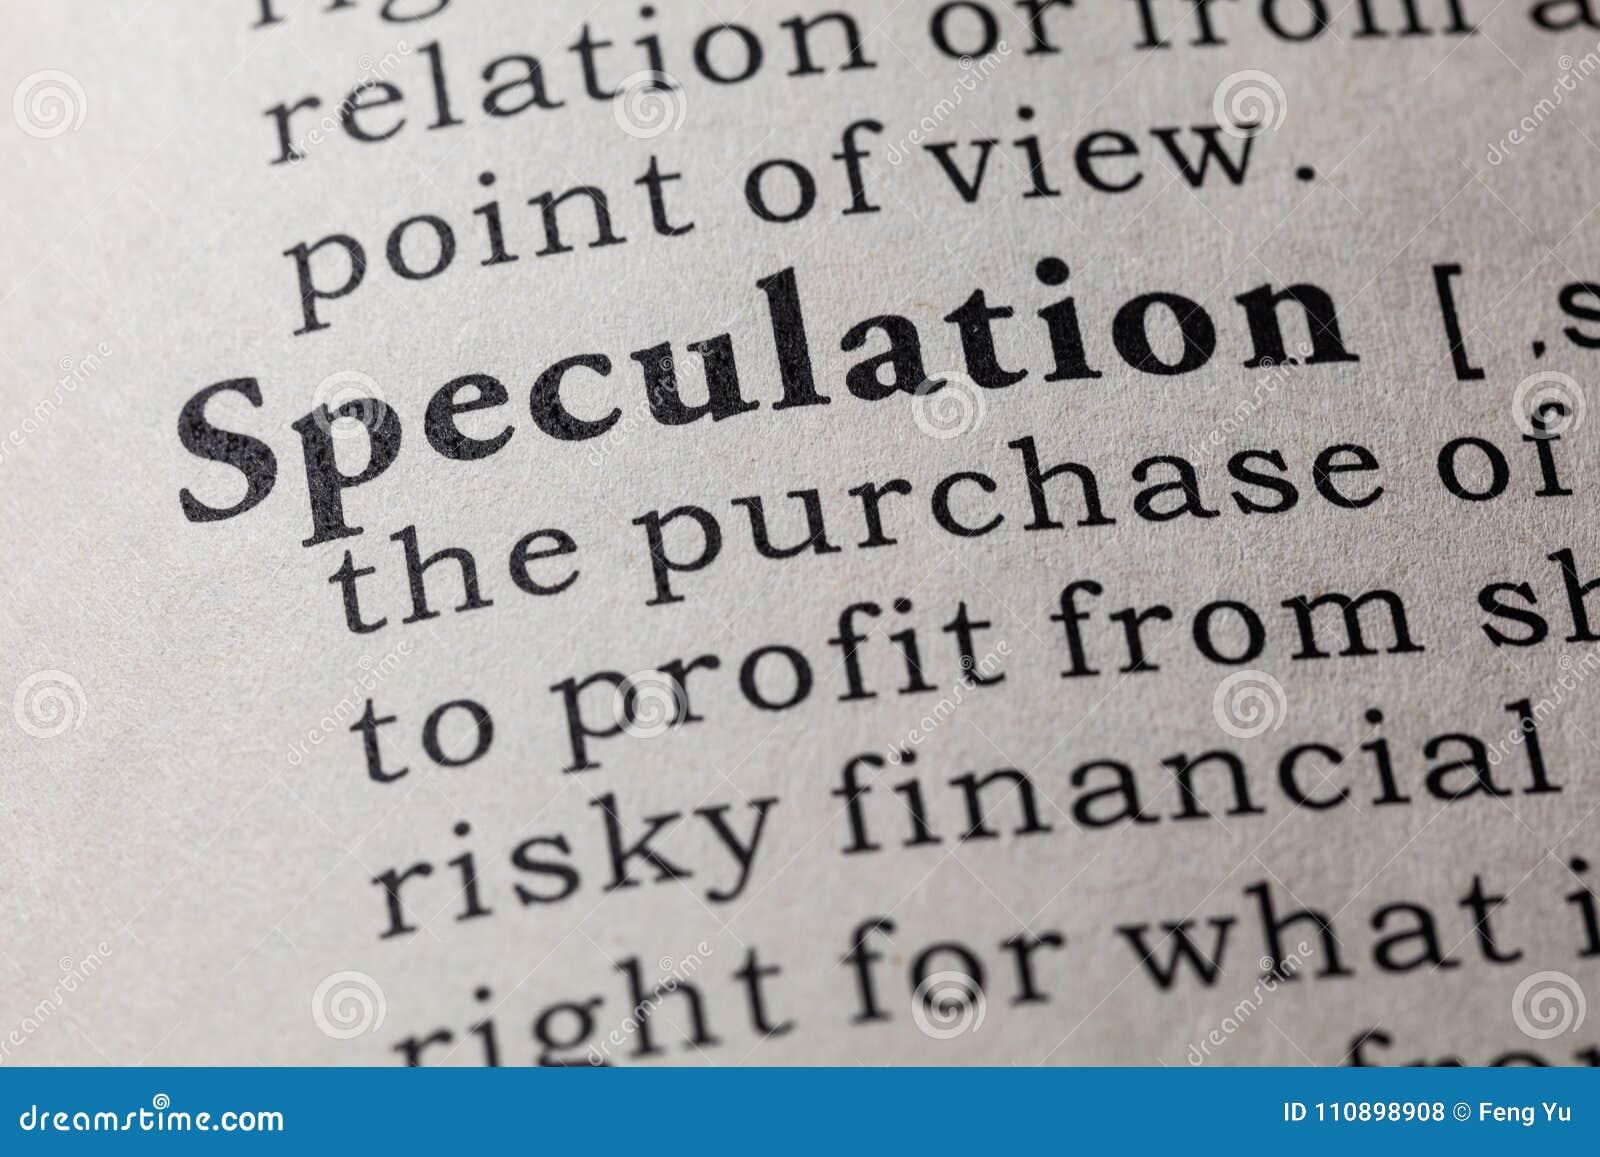 definition of speculation